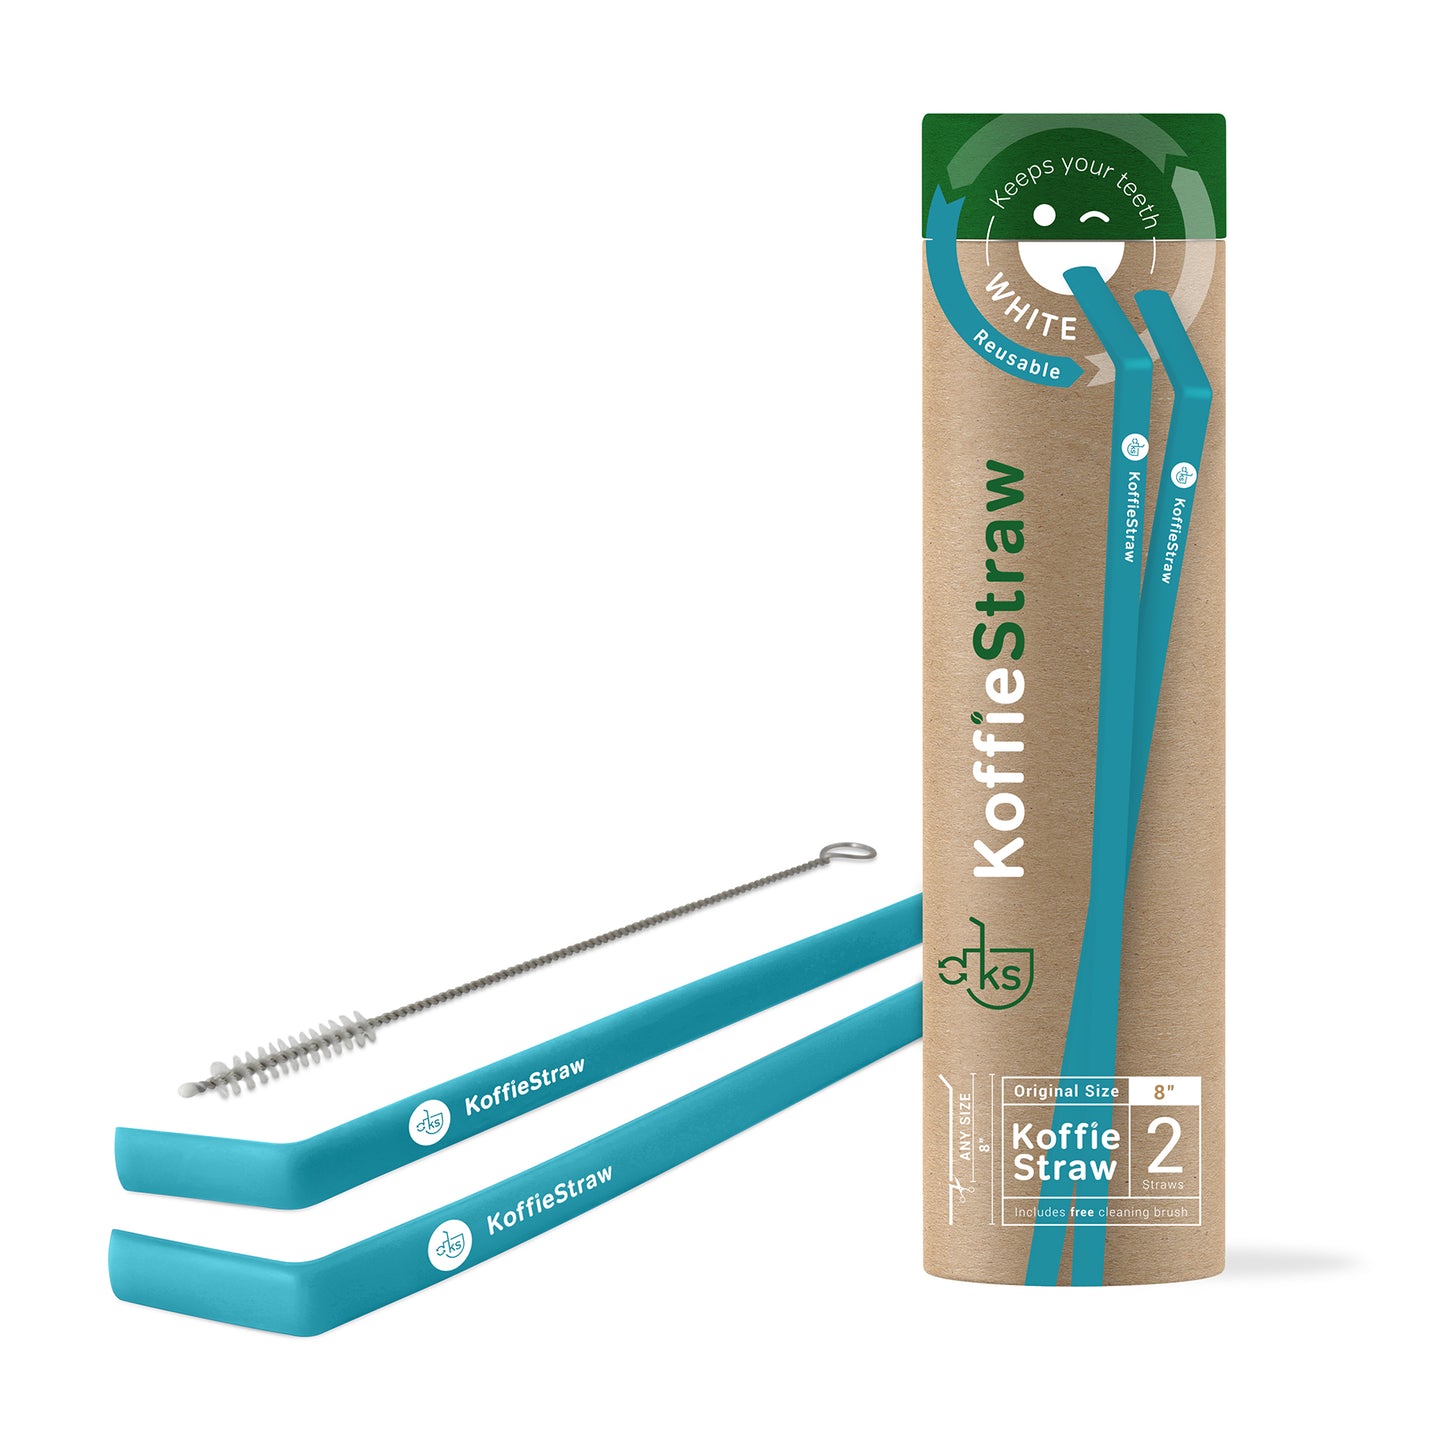 GIFT TUBE Surf blue KoffieStraws: 2x of 8" KoffieStraws and 1x stainless steel cleaning brush